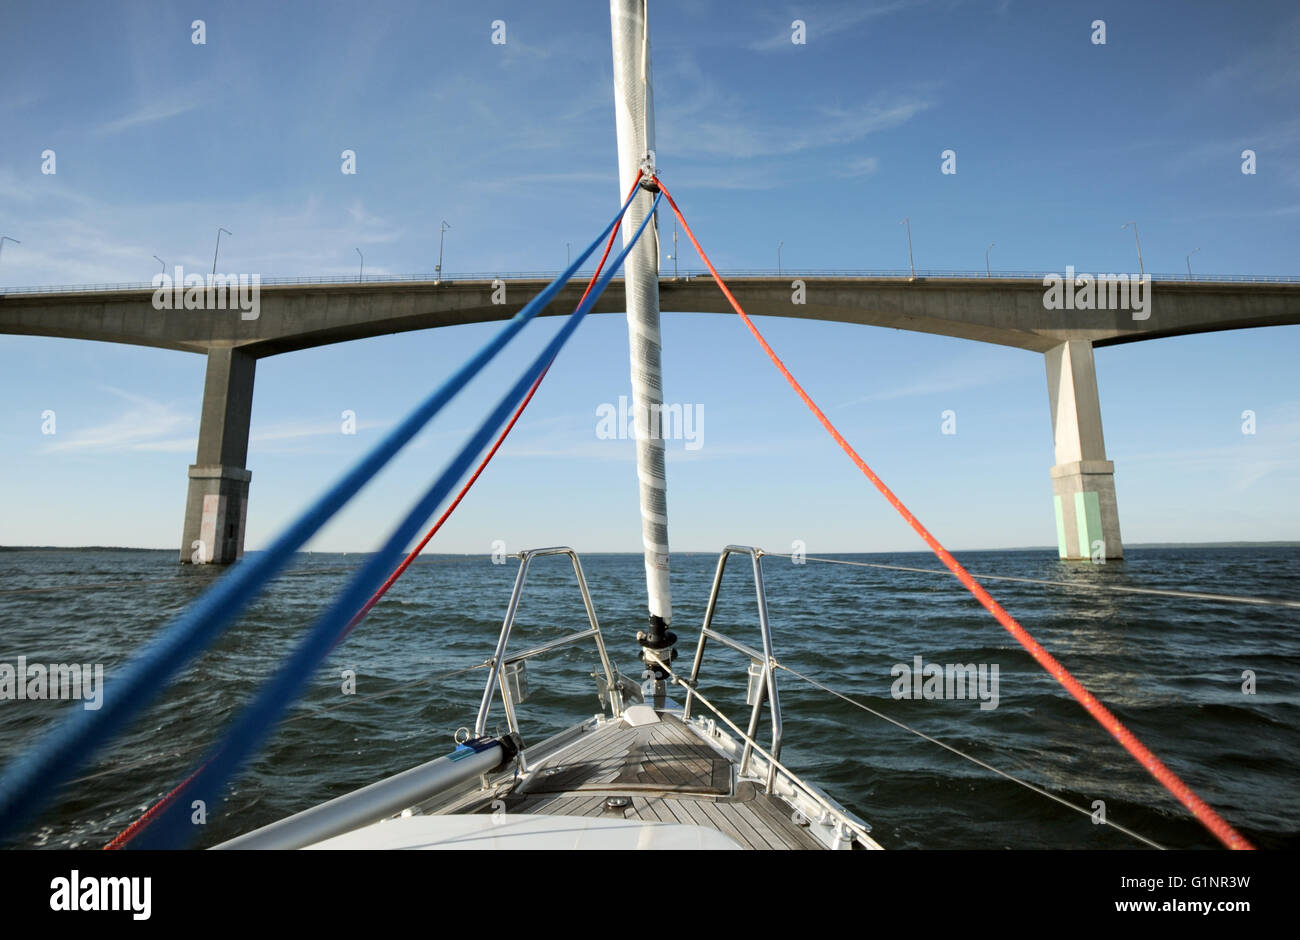 A yacht on the Baltic Sea is sailing towards the Oeland Bridge in Sweden, 10 June 2015. The bridge connects the Oeland Island with the mainland Sweden. It had been inaugurated on 30 September 1972 and is 6,072 meters long. Photo: Britta Pedersen - NO WIRE SERVICE - Stock Photo